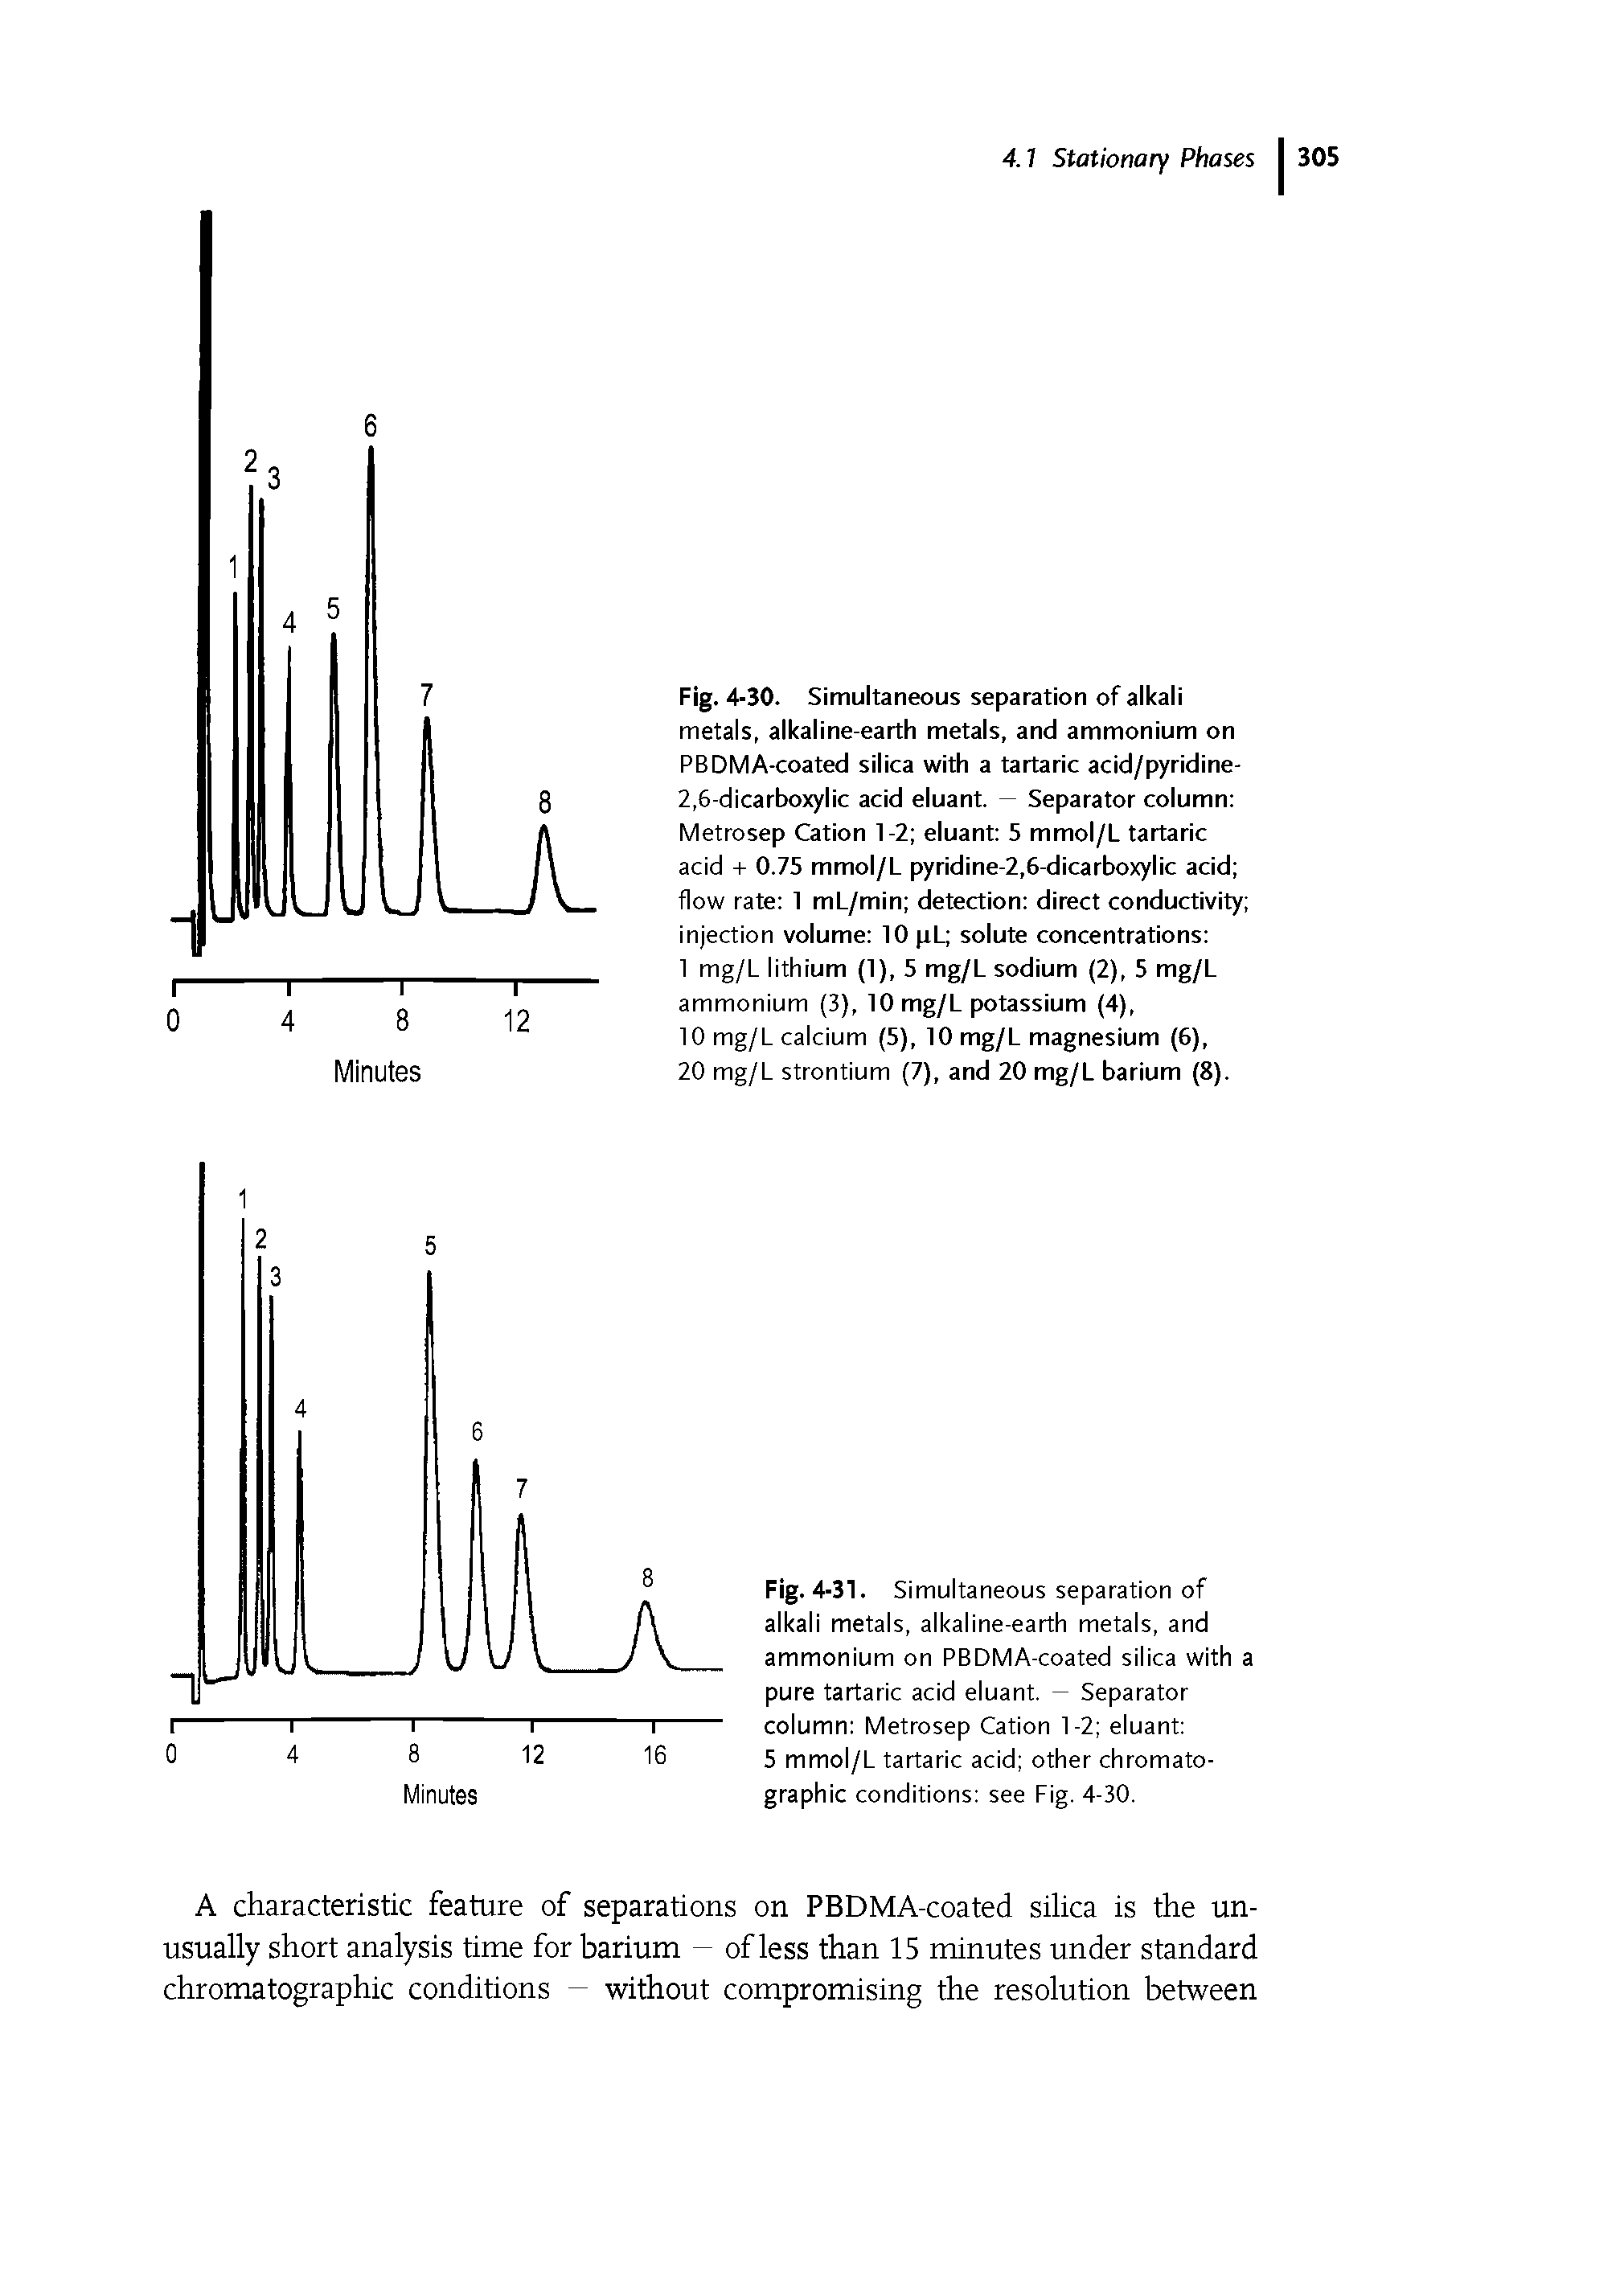 Fig. 4-30. Simultaneous separation of alkali metals, alkaline-earth metals, and ammonium on PBDMA-coated silica with a tartaric acid/pyridine-2,6-dicarboxylic acid eluant. — Separator column Metrosep Cation 1-2 eluant 5 mmol/L tartaric acid -t 0.75 mmol/L pyridine-2,6-dicarboxylic acid flow rate 1 mL/min detection direct conductivity injection volume 10 pL solute concentrations ...